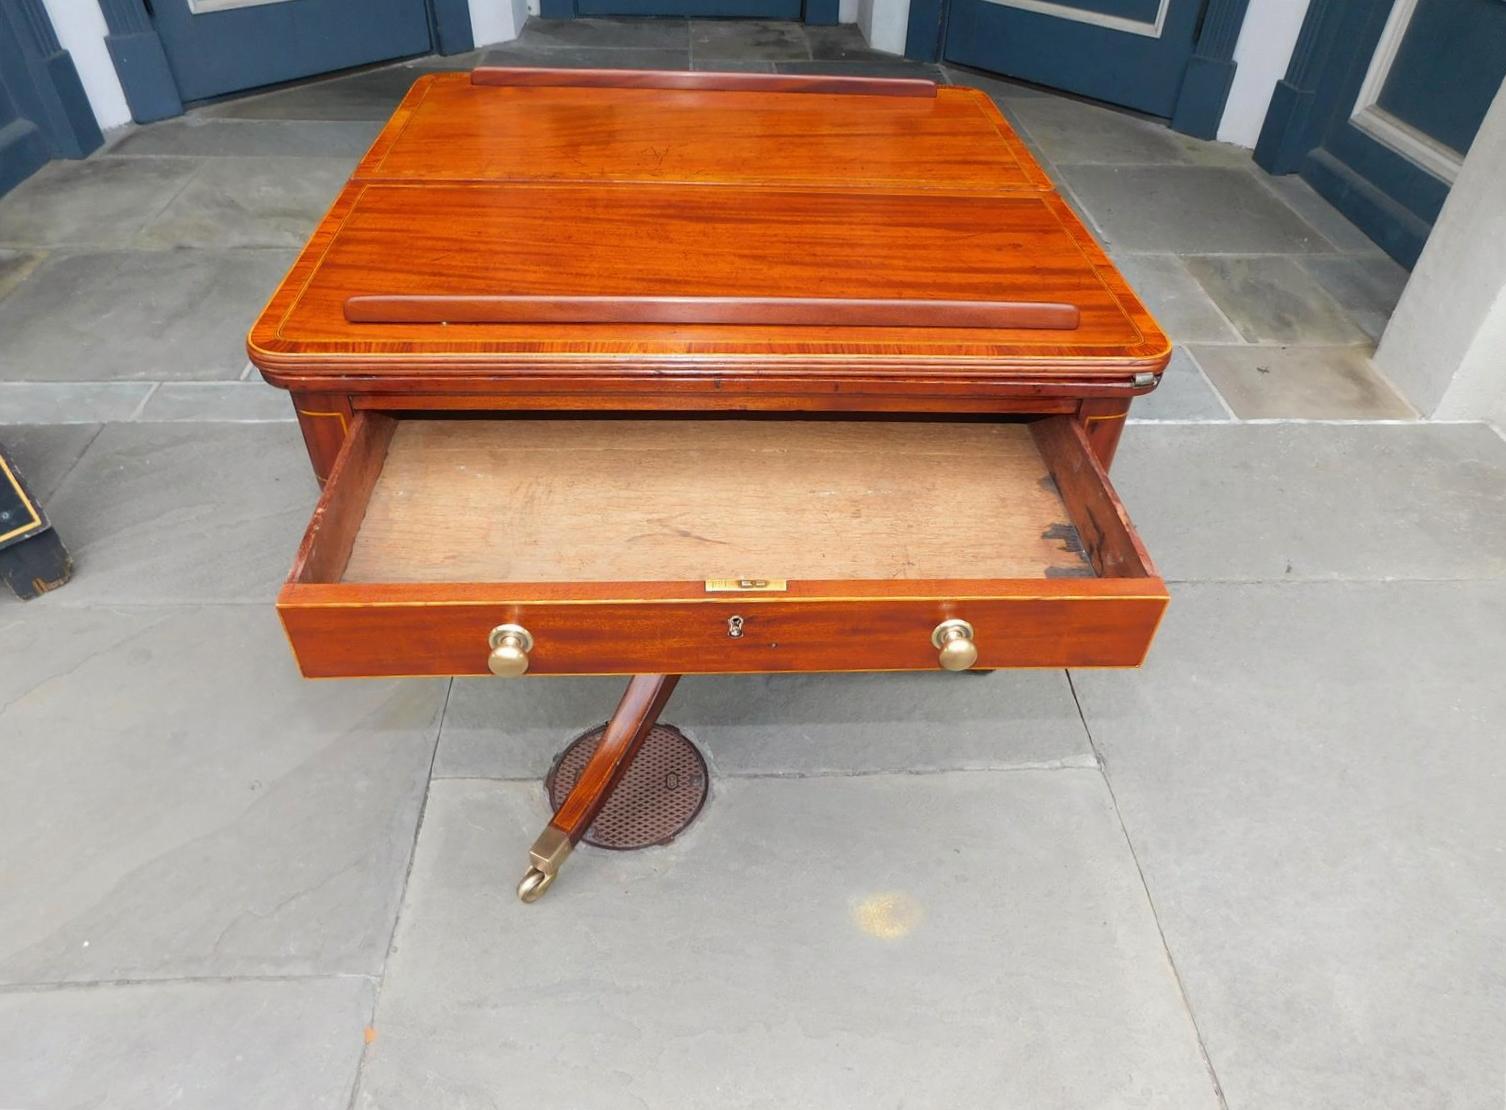 Late 18th Century English Regency Mahogany Leather Reading Table with Flanking Candle Slides 1790 For Sale